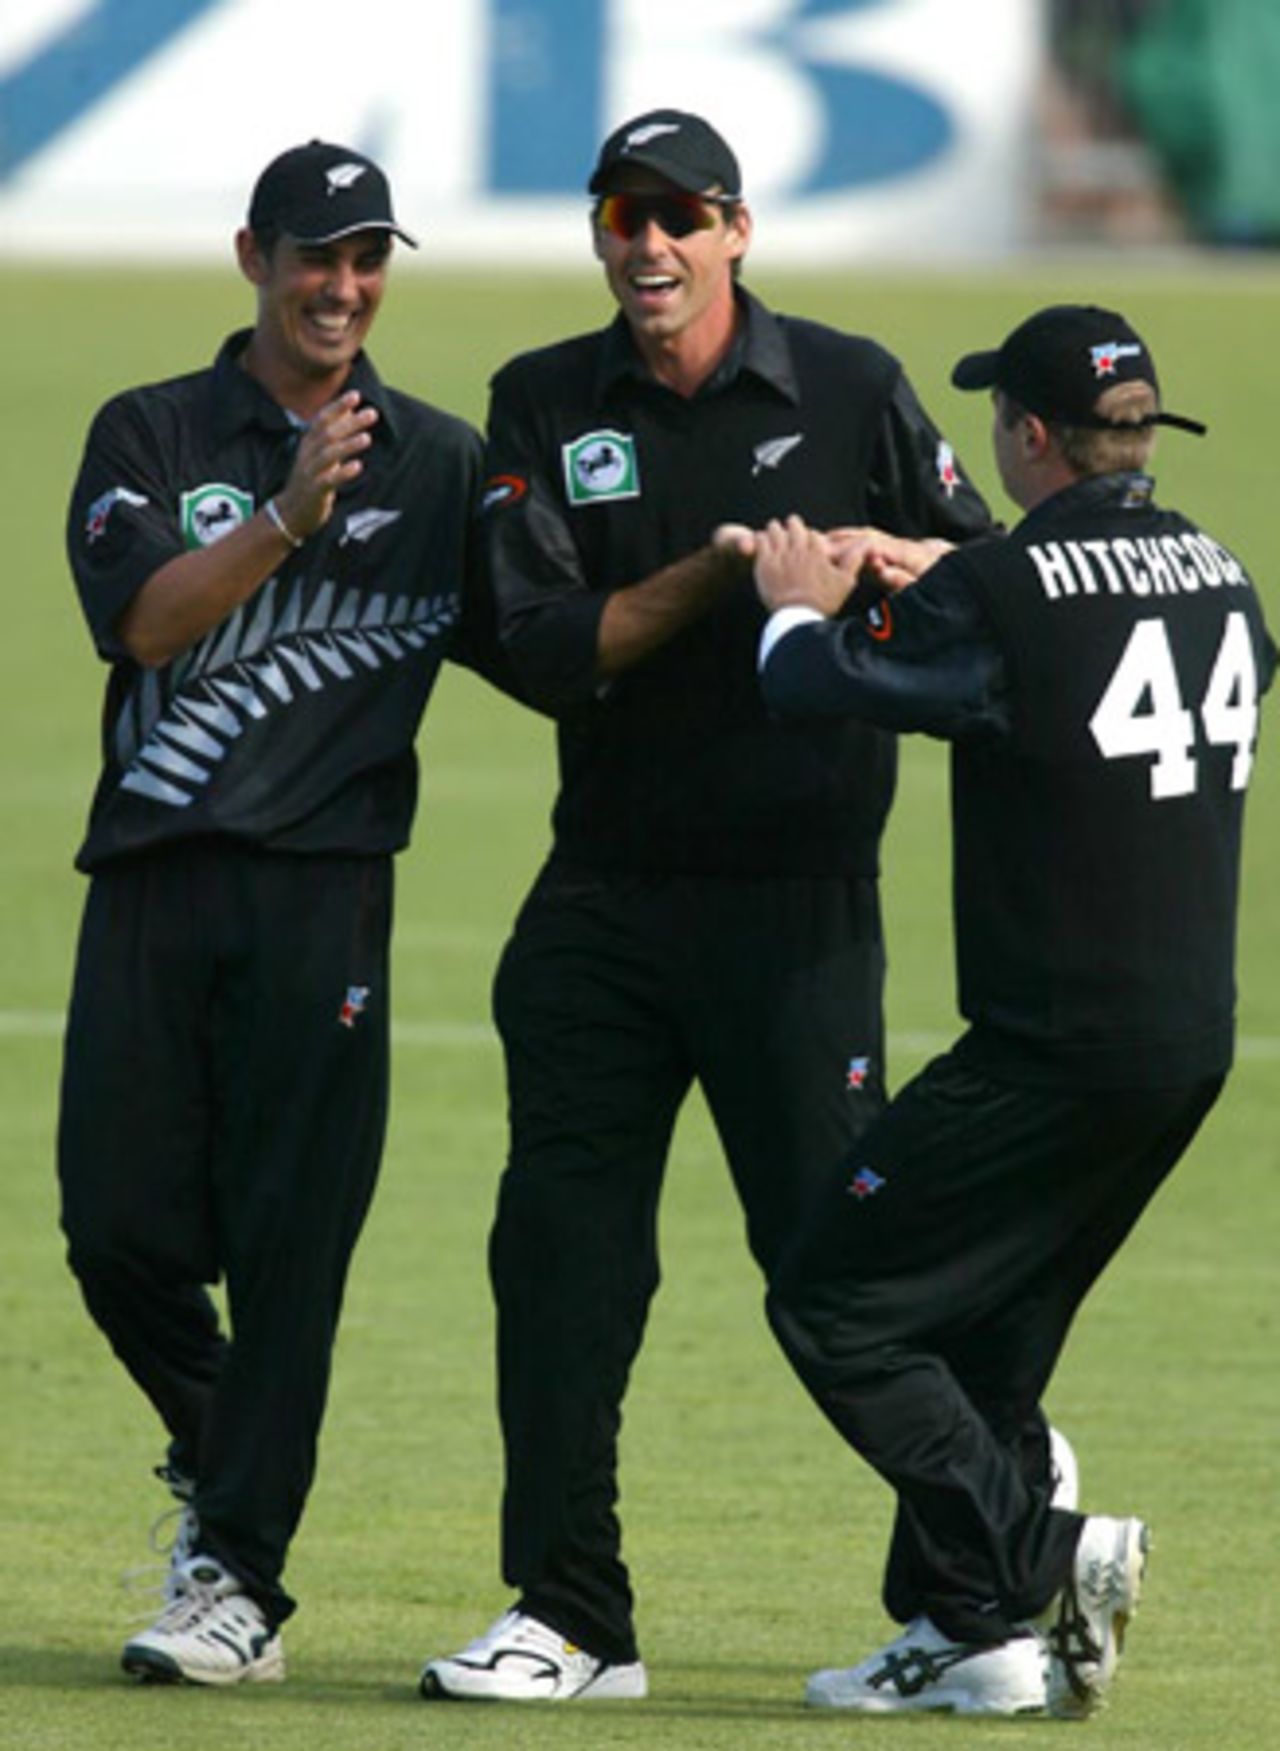 New Zealand players Mathew Sinclair (left), Stephen Fleming and Paul Hitchcock celebrate the dismissal of Indian batsman Rahul Dravid, run out by Fleming for 18. 2nd ODI: New Zealand v India at McLean Park, Napier, 29 December 2002.